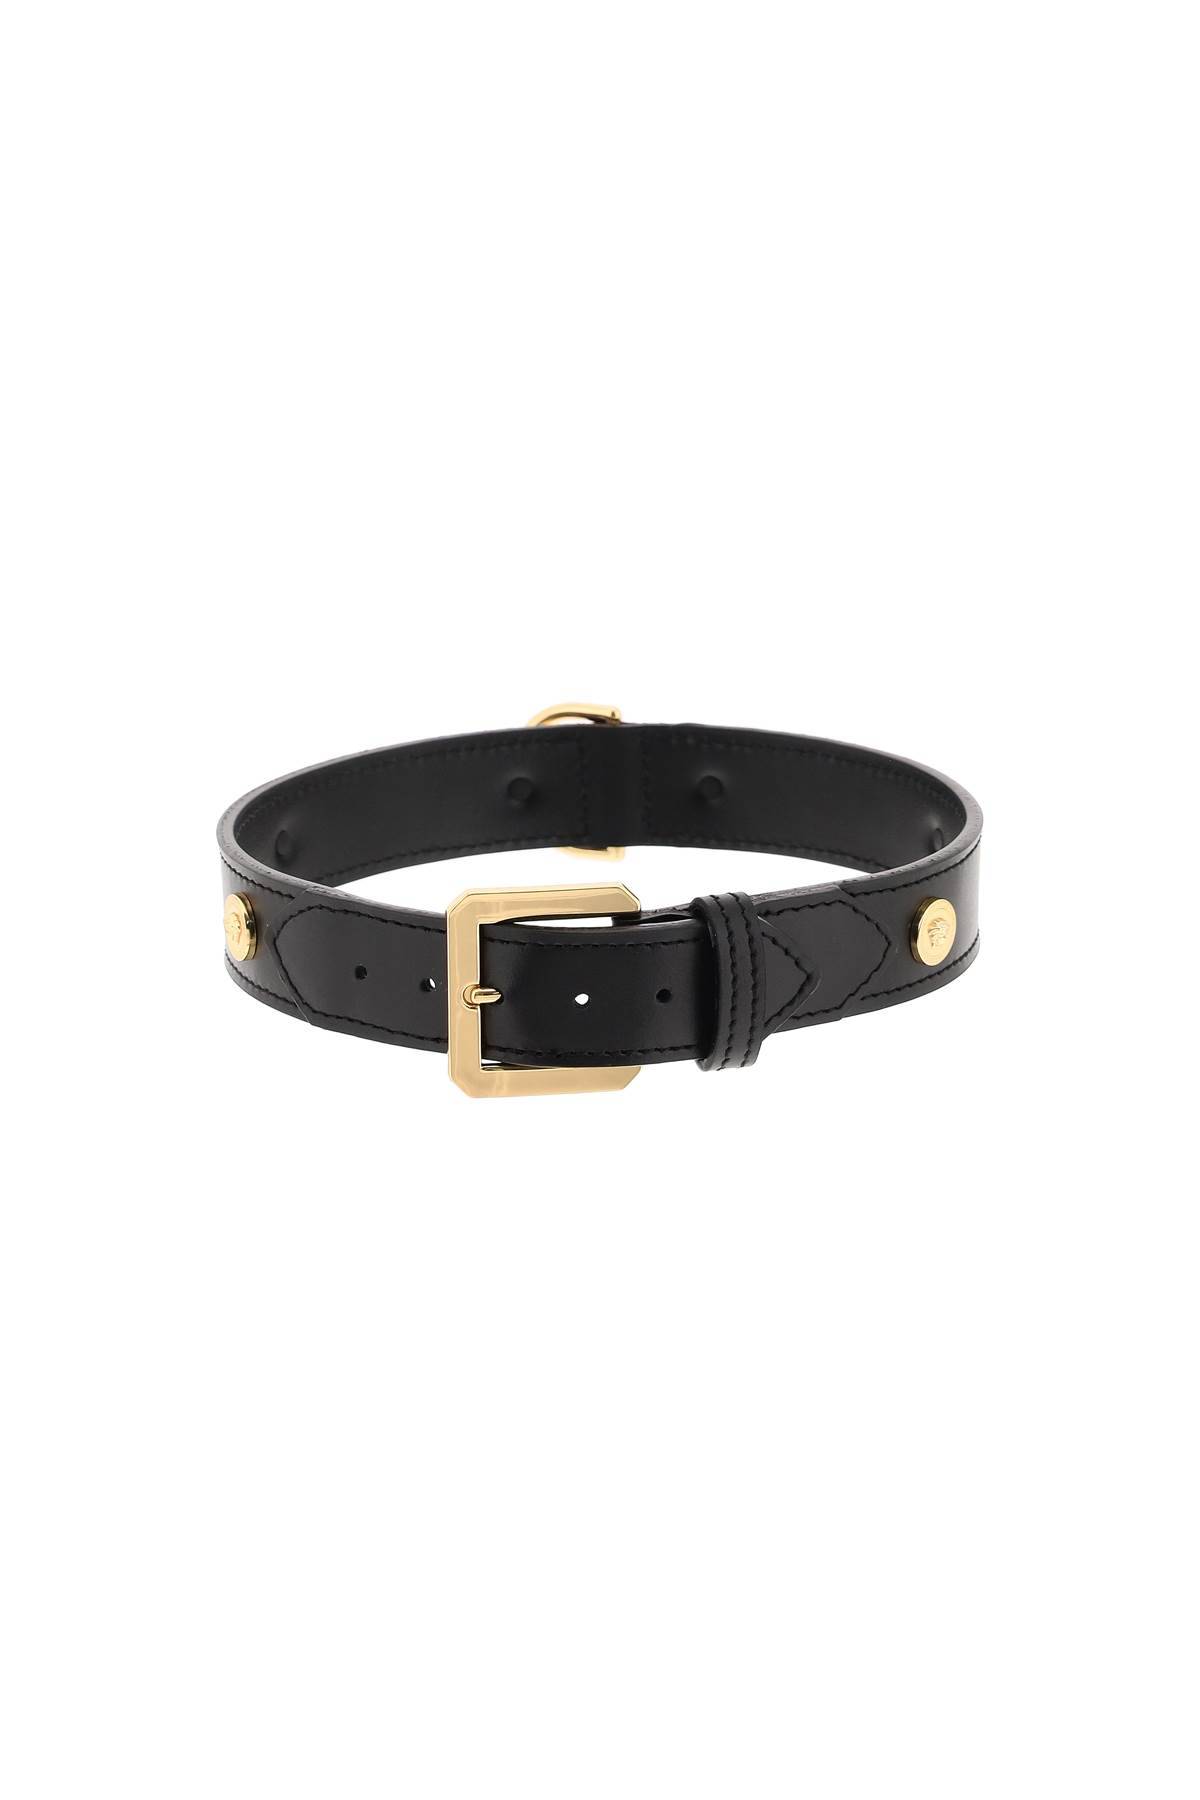 Versace VERSACE leather collar with medusa studs - large